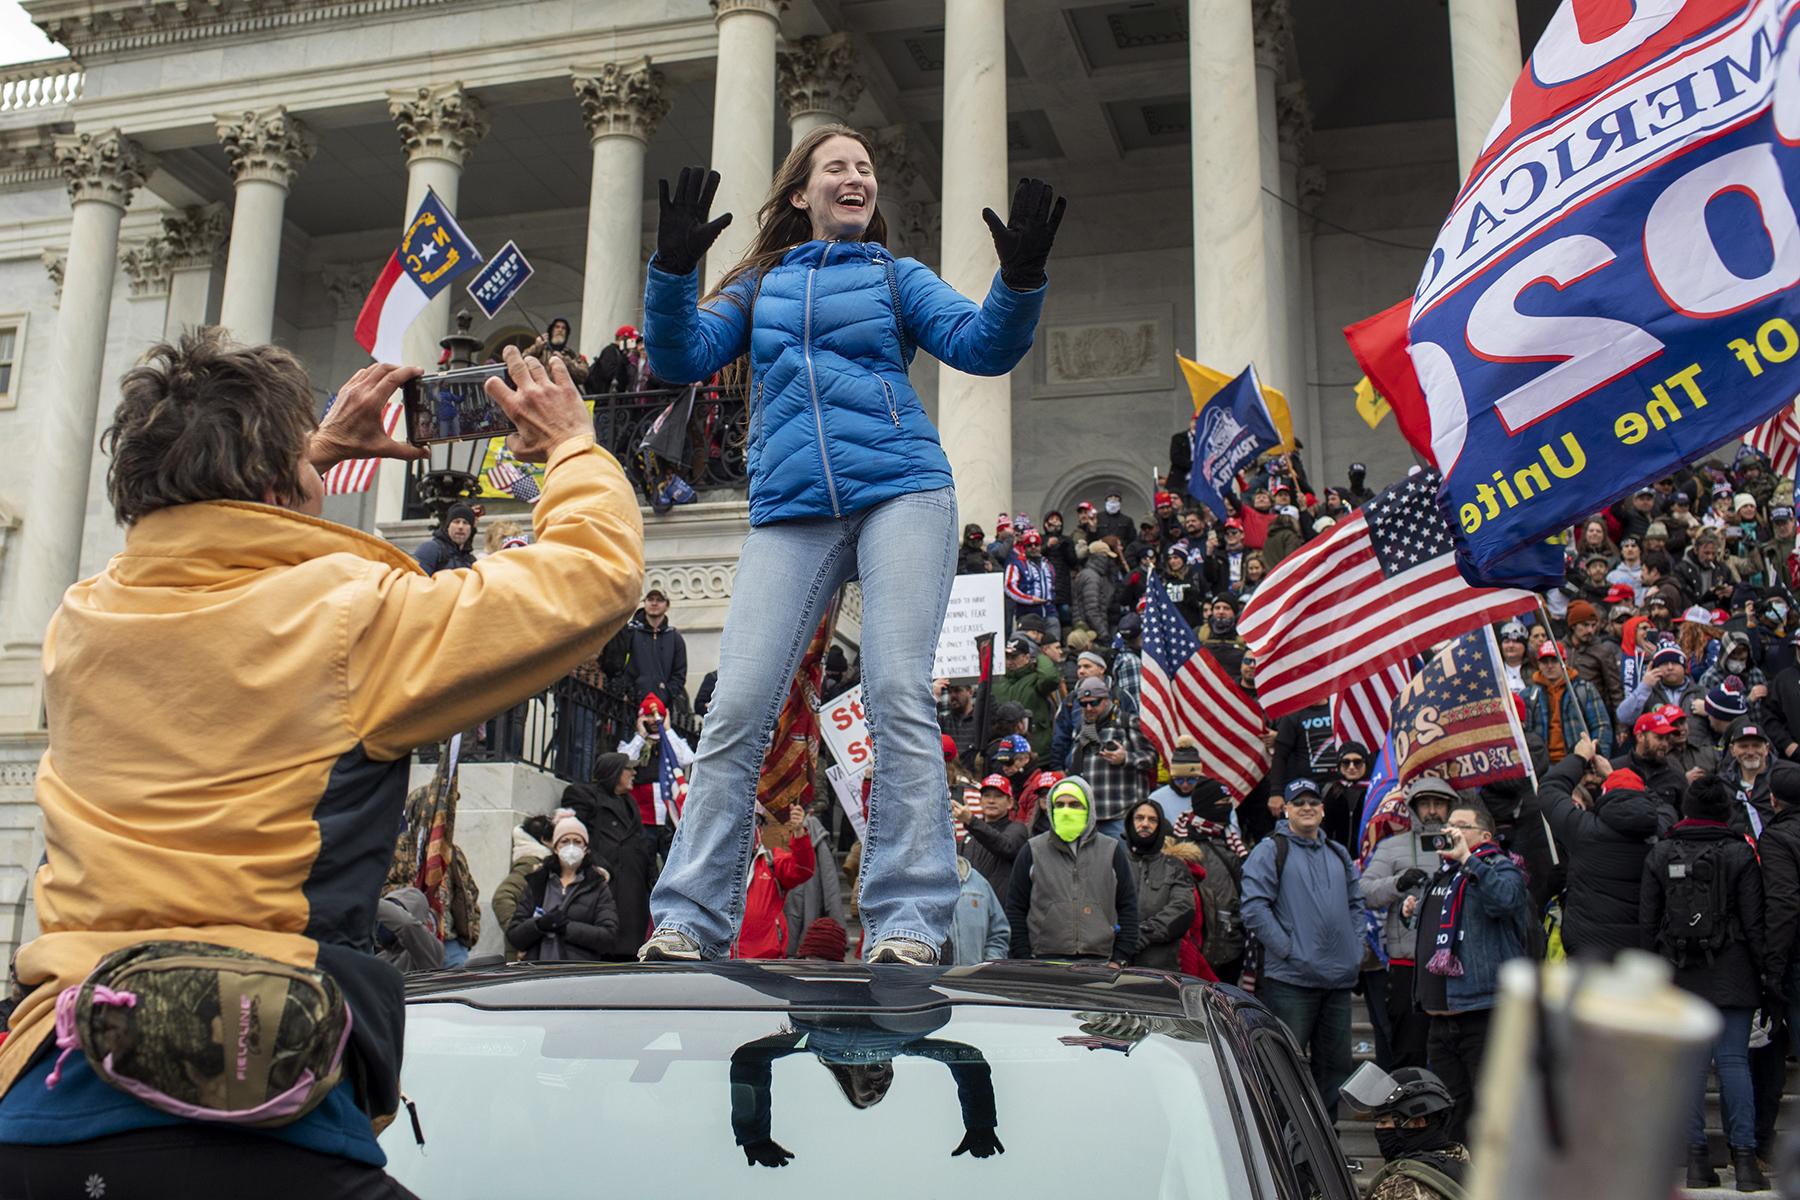 Protests, Pestilence & Politics - A woman dances on top of an SUV on the east side of the...